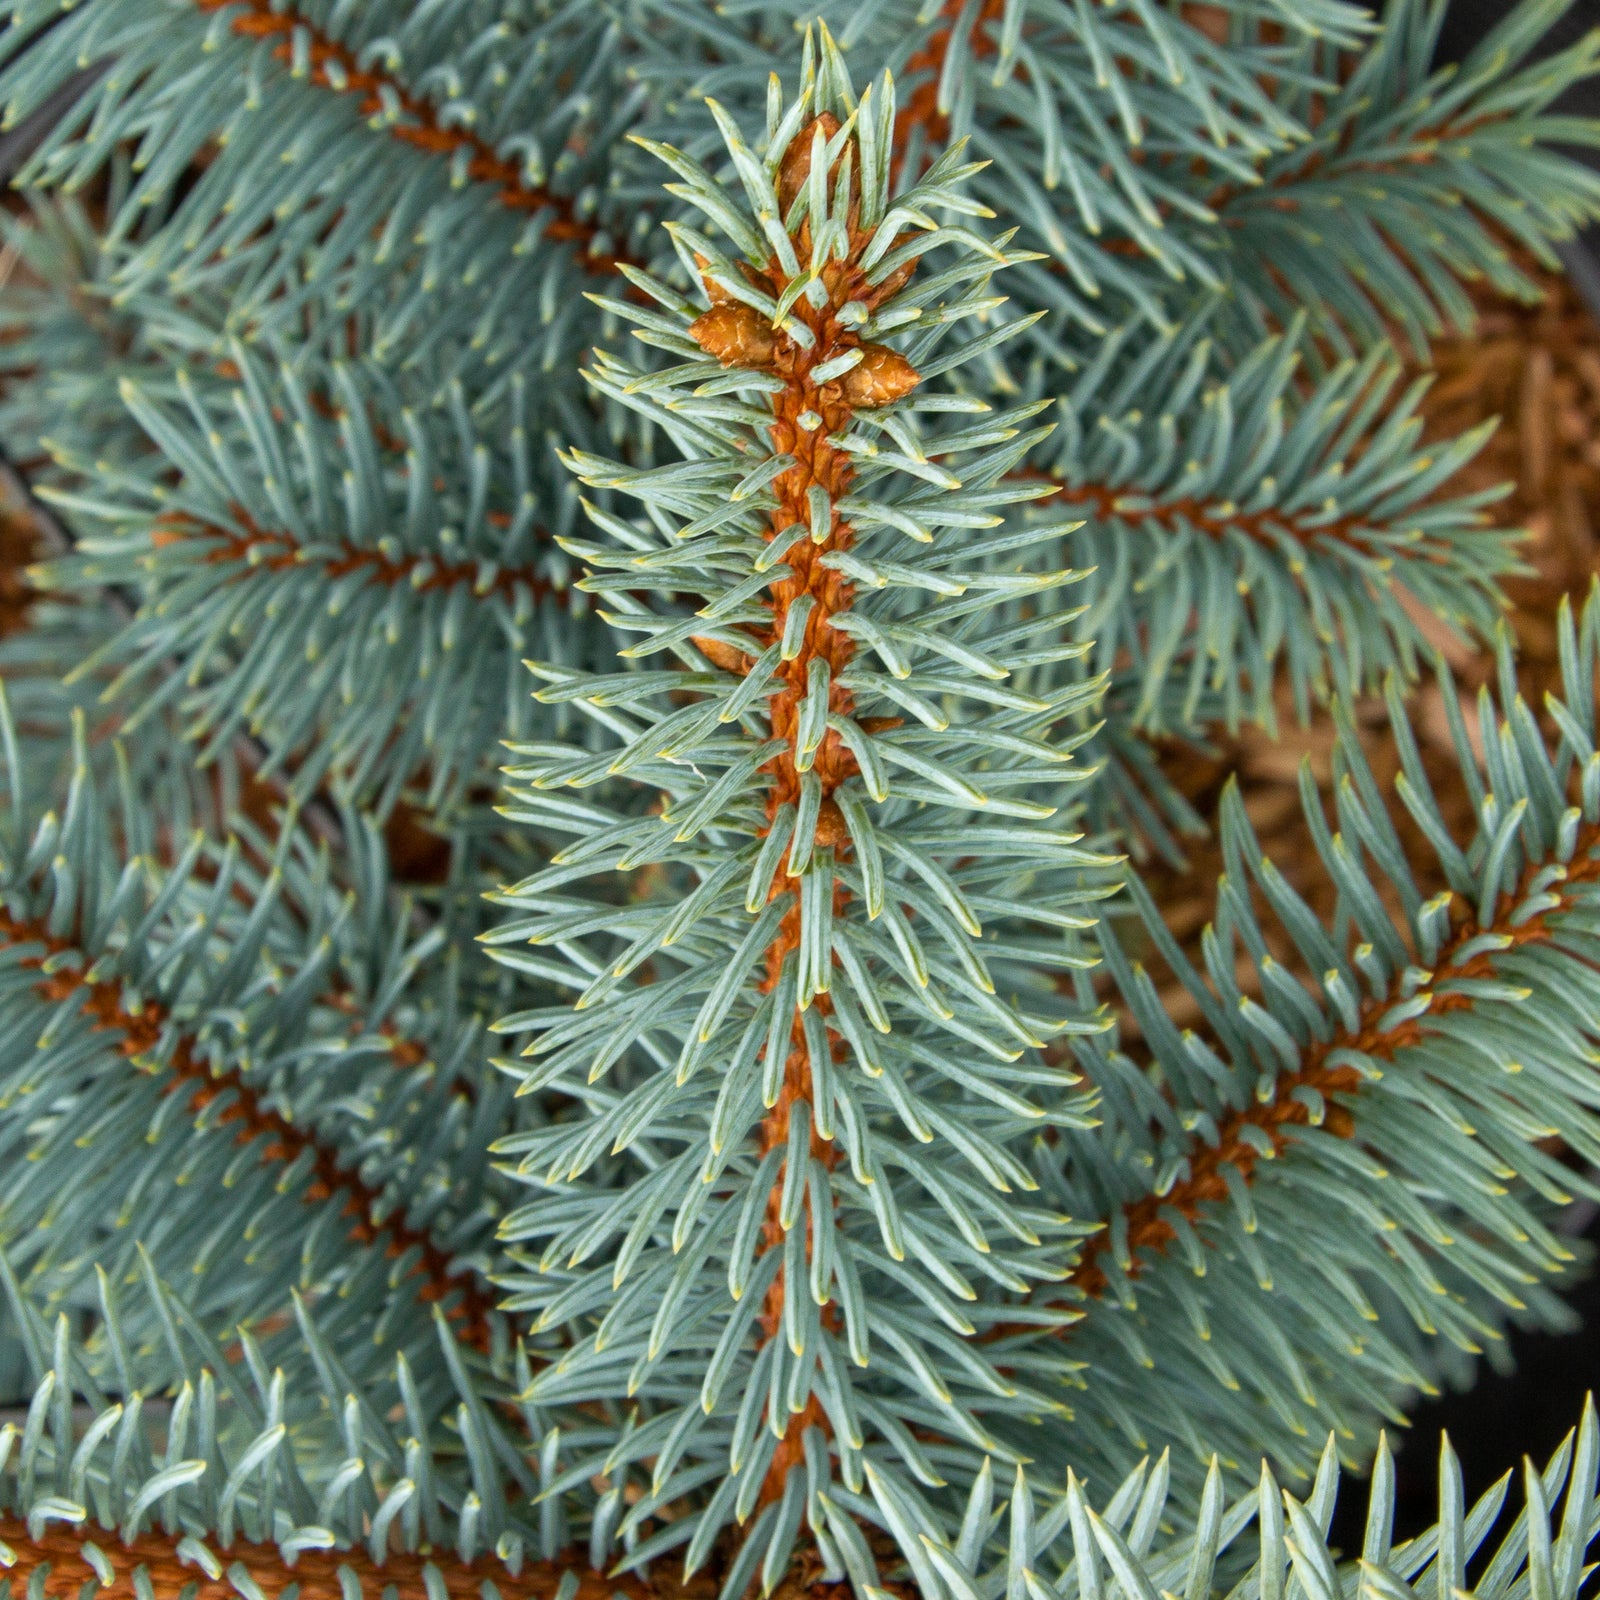 Picea pungens Koster - Colorado Spruce